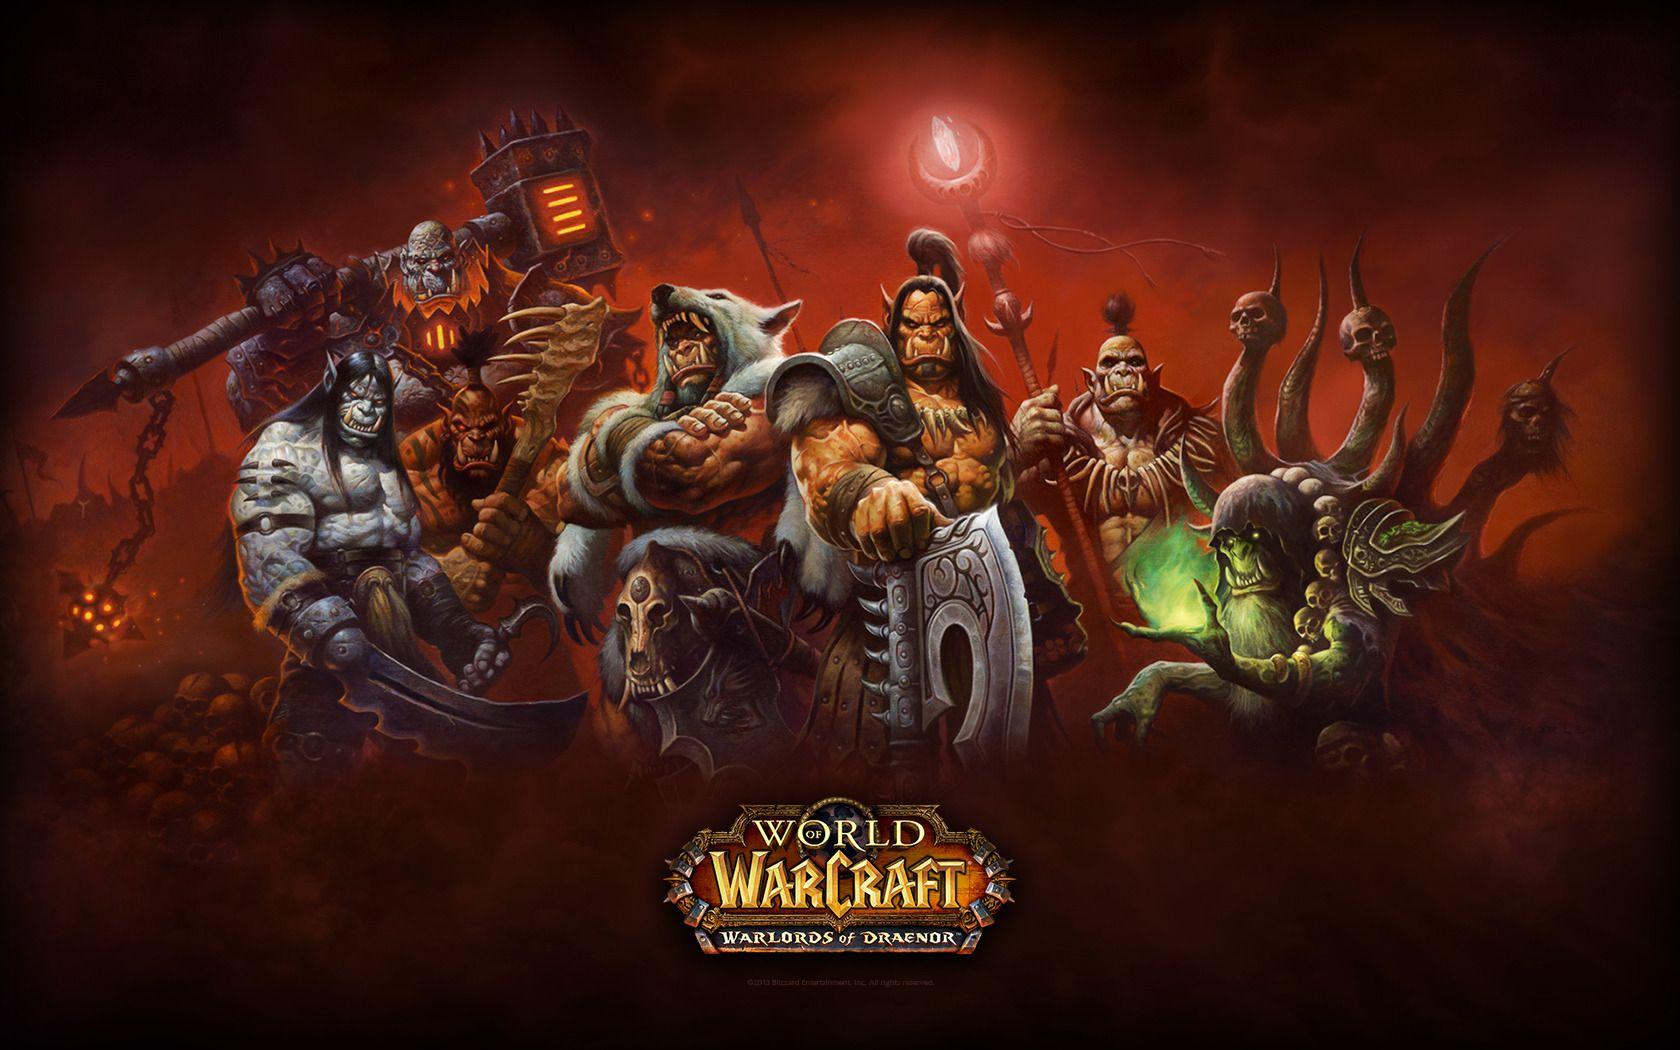 Se acerca World of Warcraft, Warlords of Draenor! (Megapost)